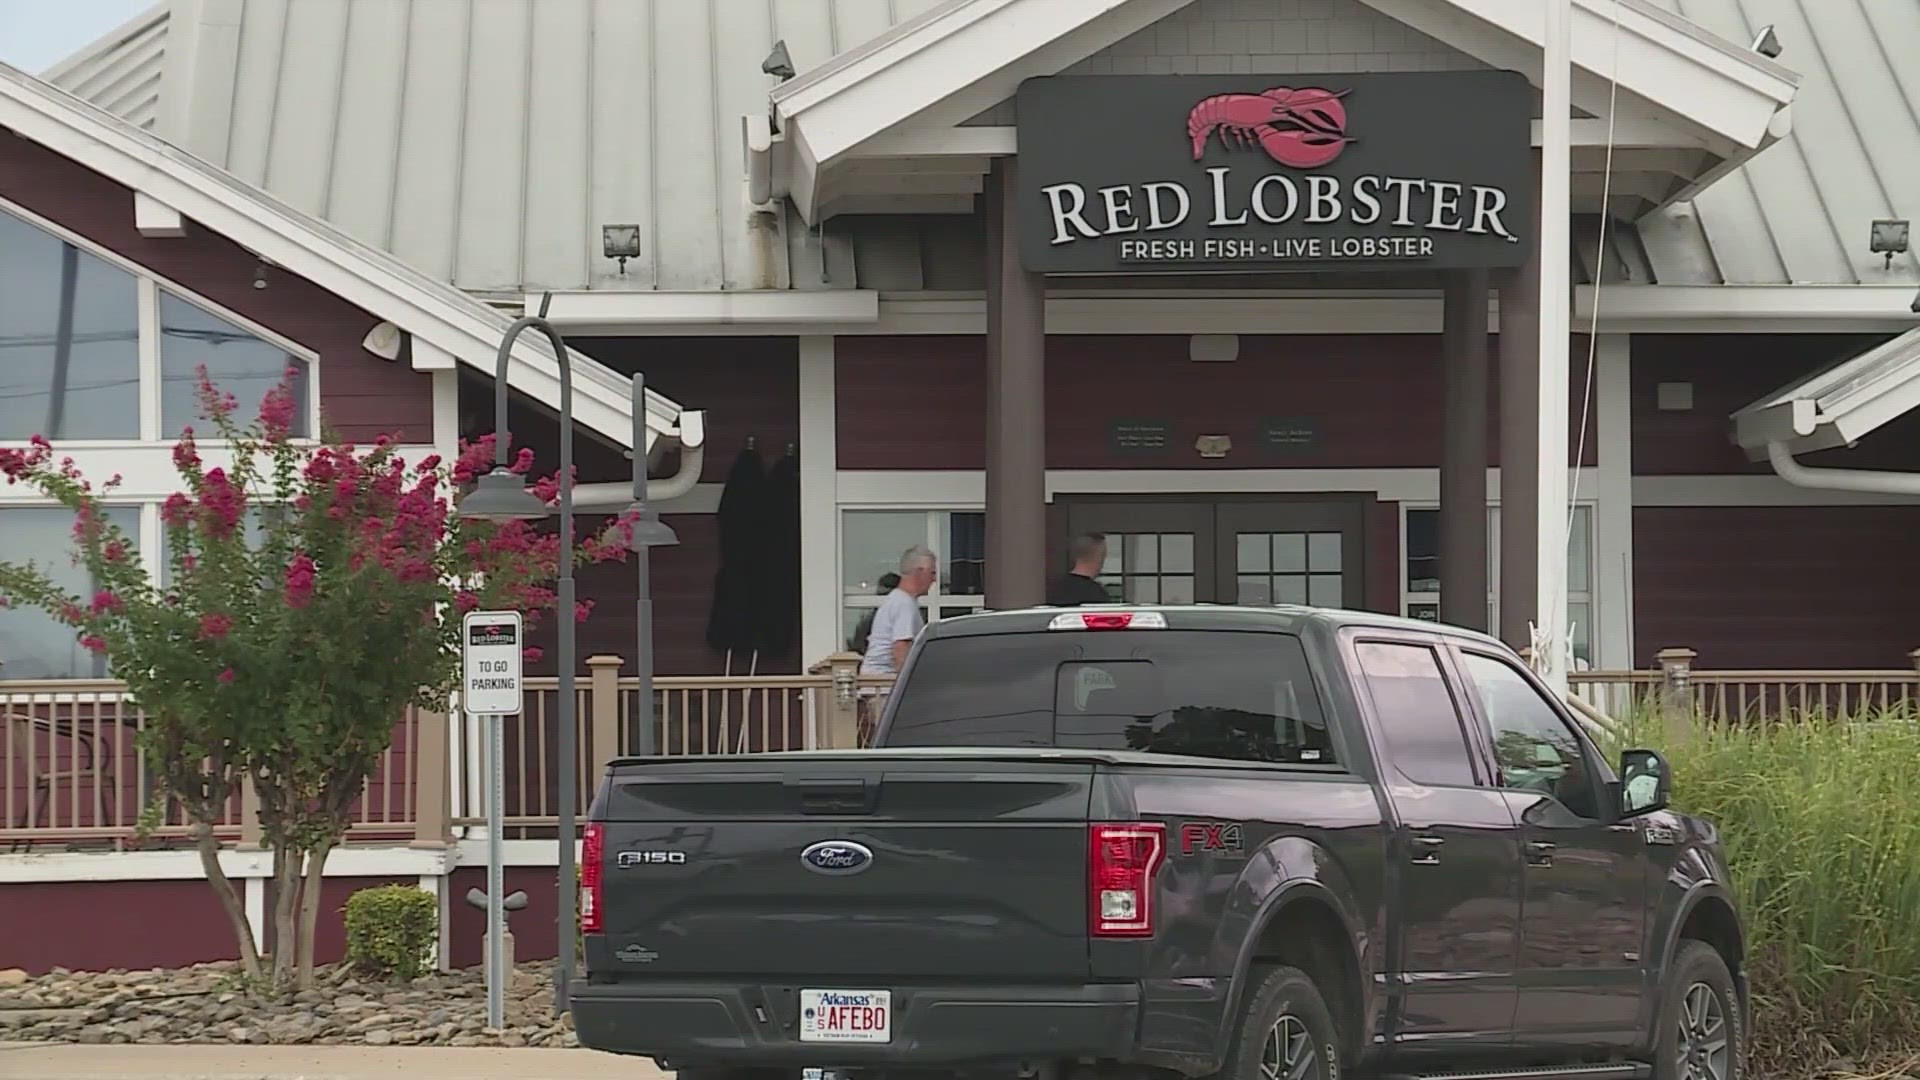 The seafood chain is allegedly looking into a Chapter 11 bankruptcy filing to renegotiate leases as well as address long-term contracts and rising labor costs.